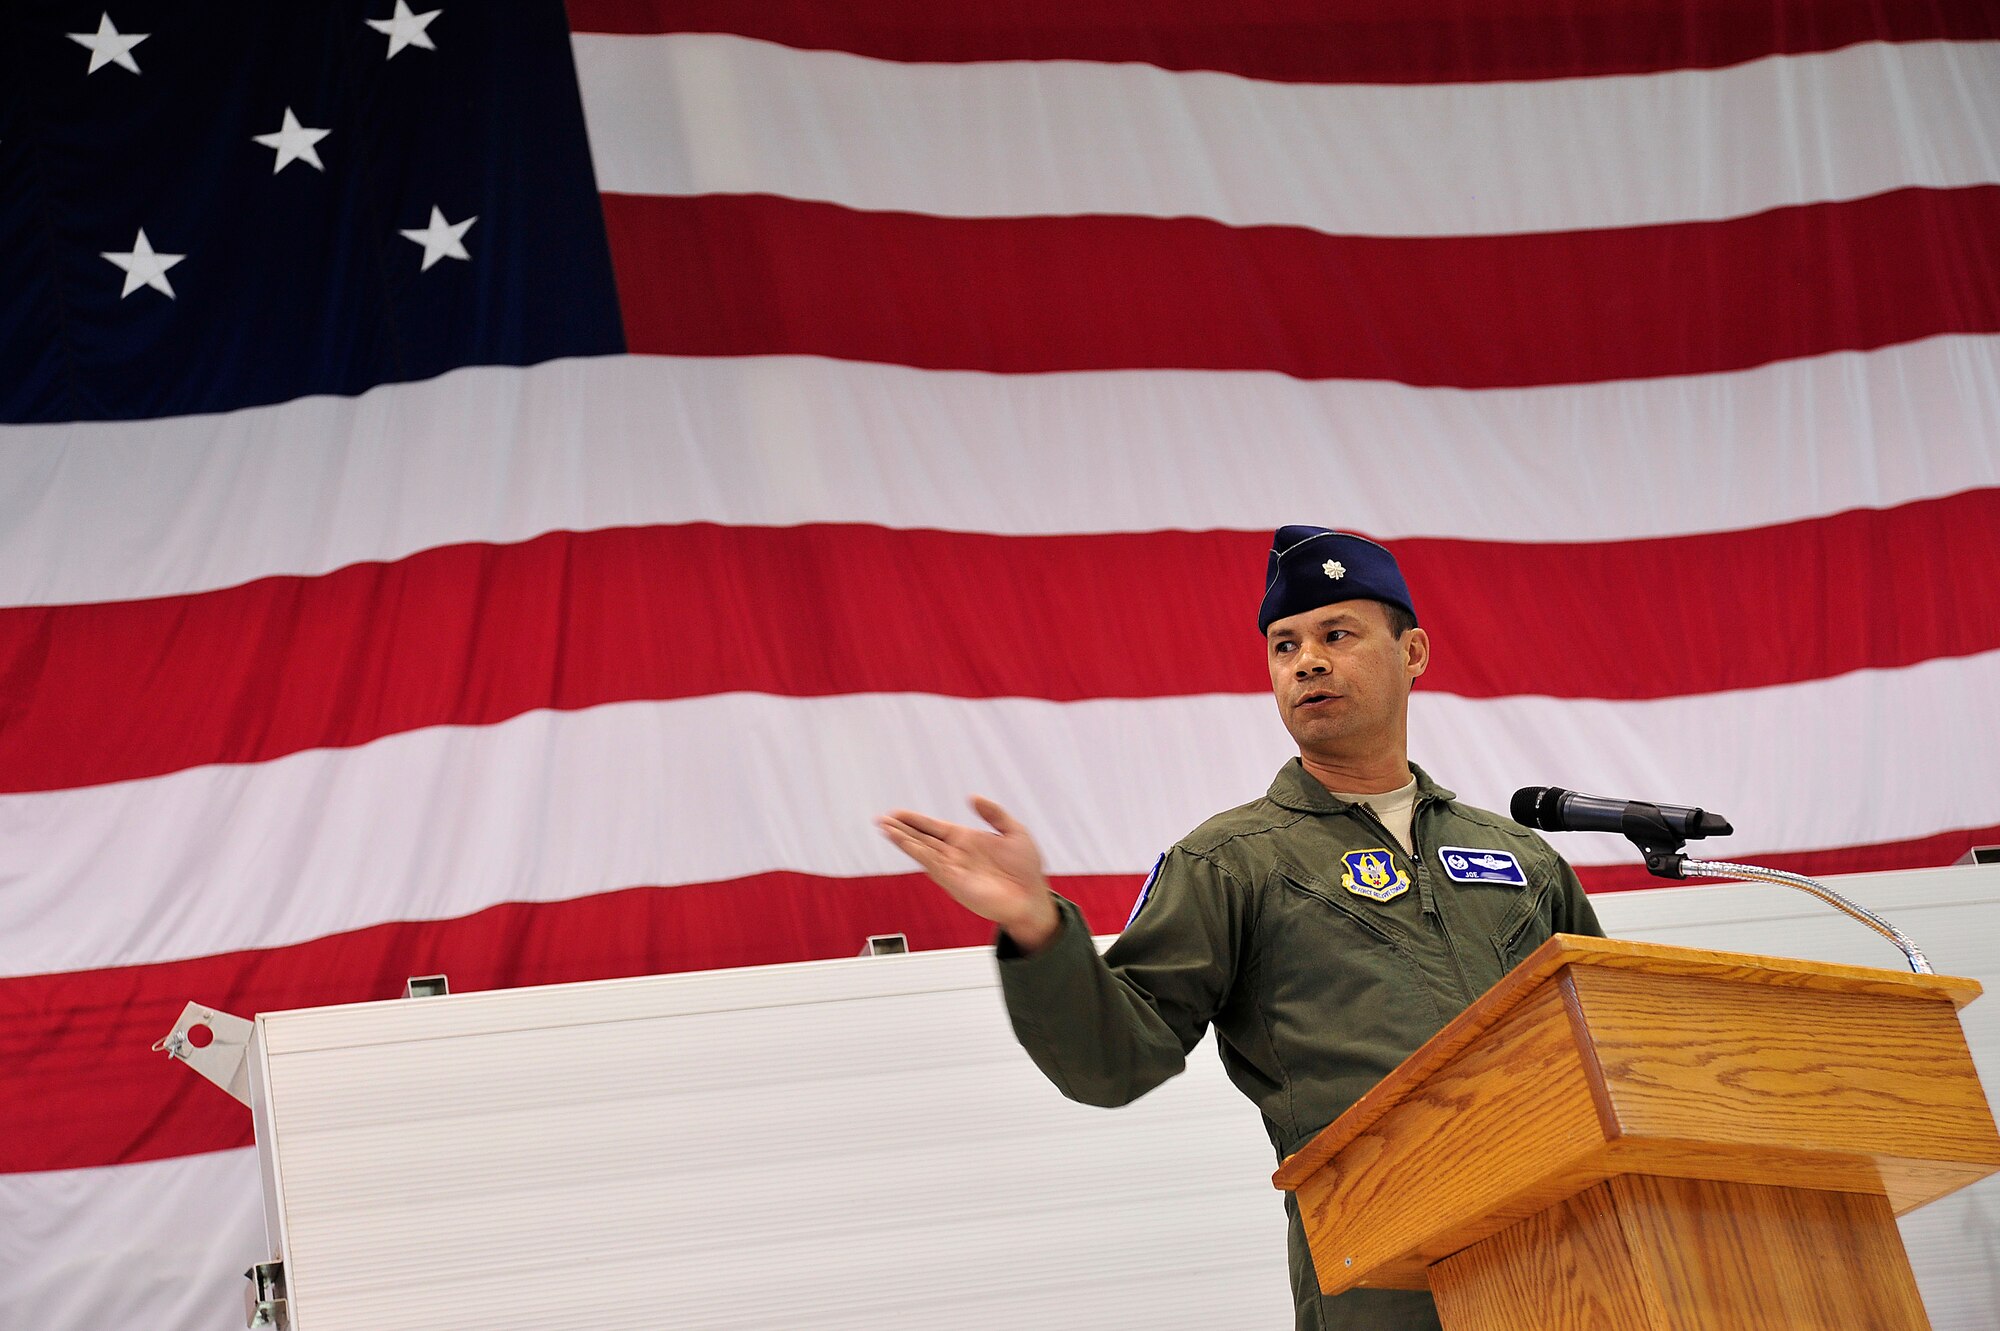 LAS VEGAS, Nev. – After assuming command, Lt. Col. Joseph addresses the audience during the 91st Attack Squadron activation ceremony April 5, 2013.  The squadron flies MQ-1B Predator and MQ-9 Reaper remotely piloted aircraft and continuously operates around the globe in support of national strategy. (U.S. Air Force photo by Senior Master Sgt. P.H.)